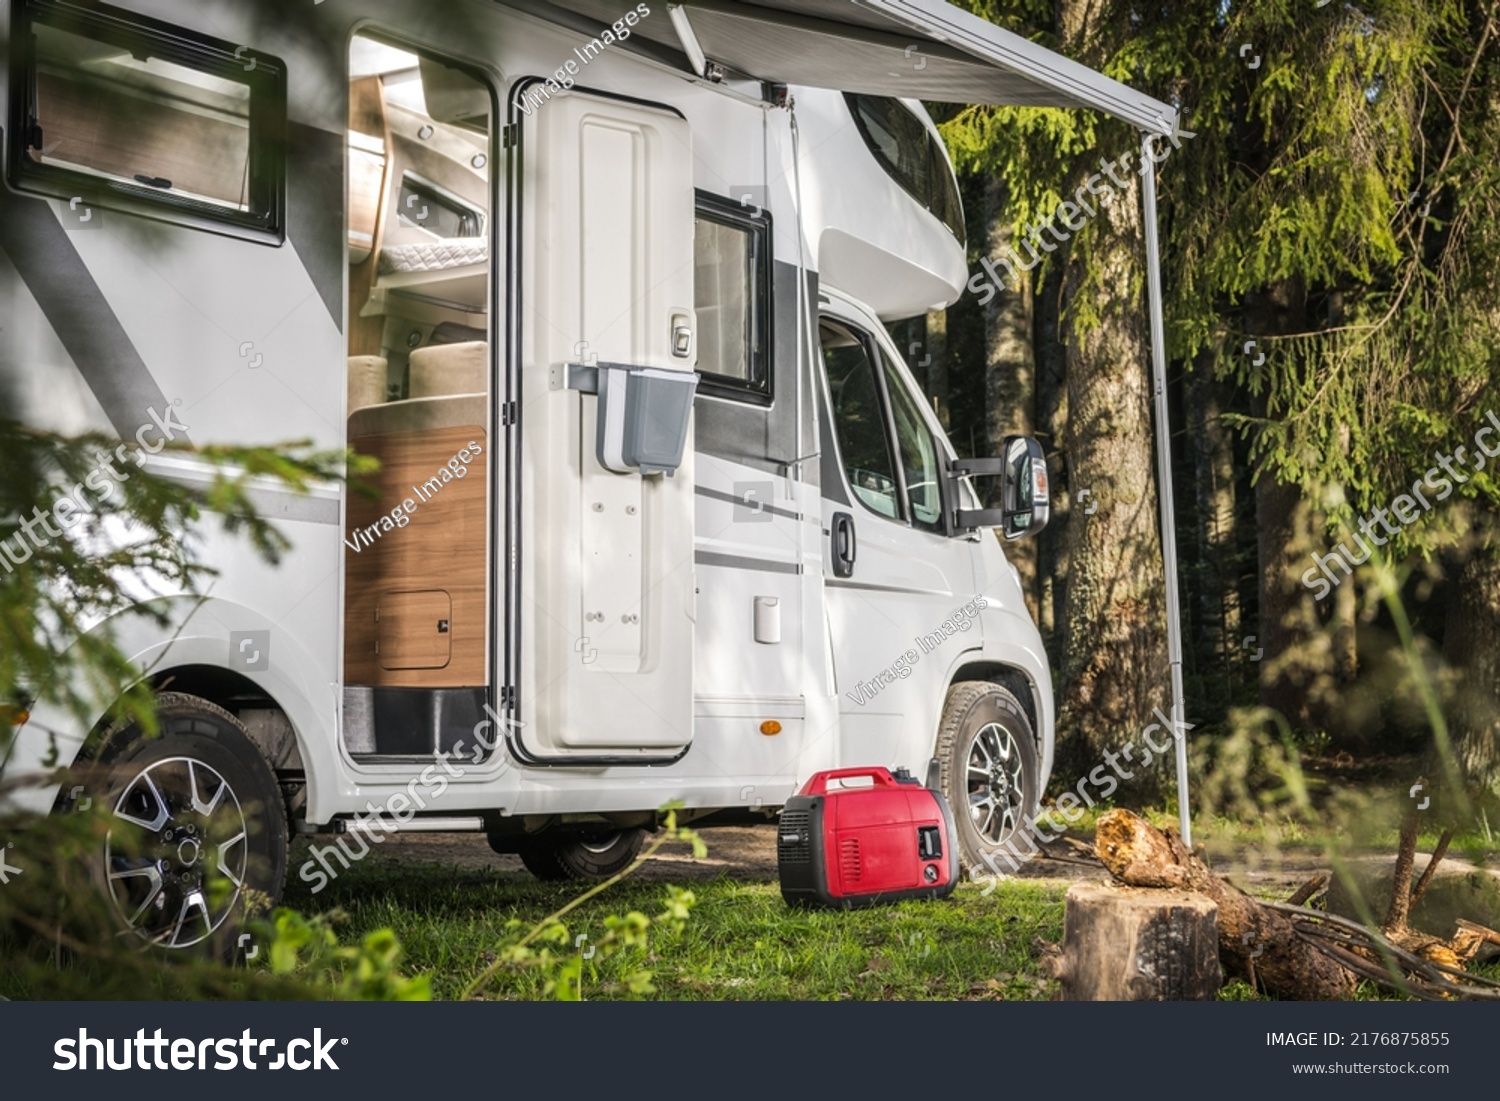 Recreational Vehicles Theme. Class C Camper Van RV and a Gas Generator Staying Next to the Motorhome. Summer Vacation. #2176875855